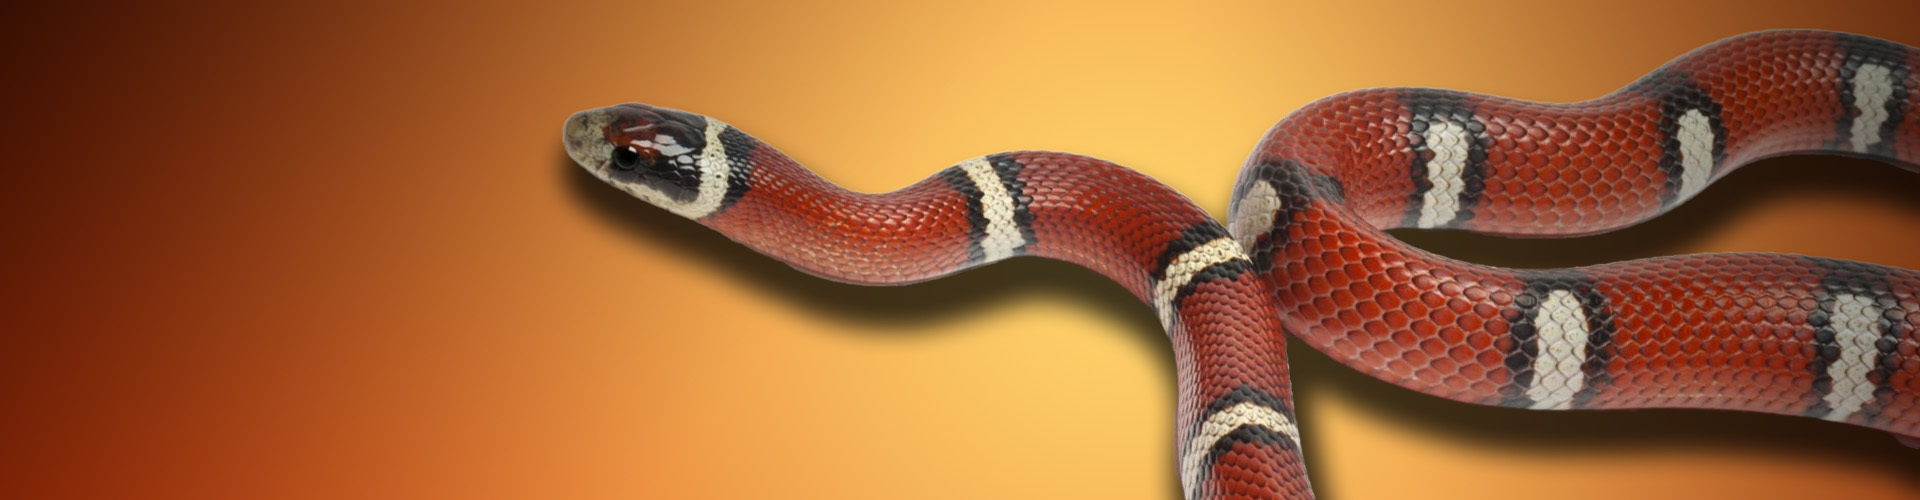 snake featured 1920x500